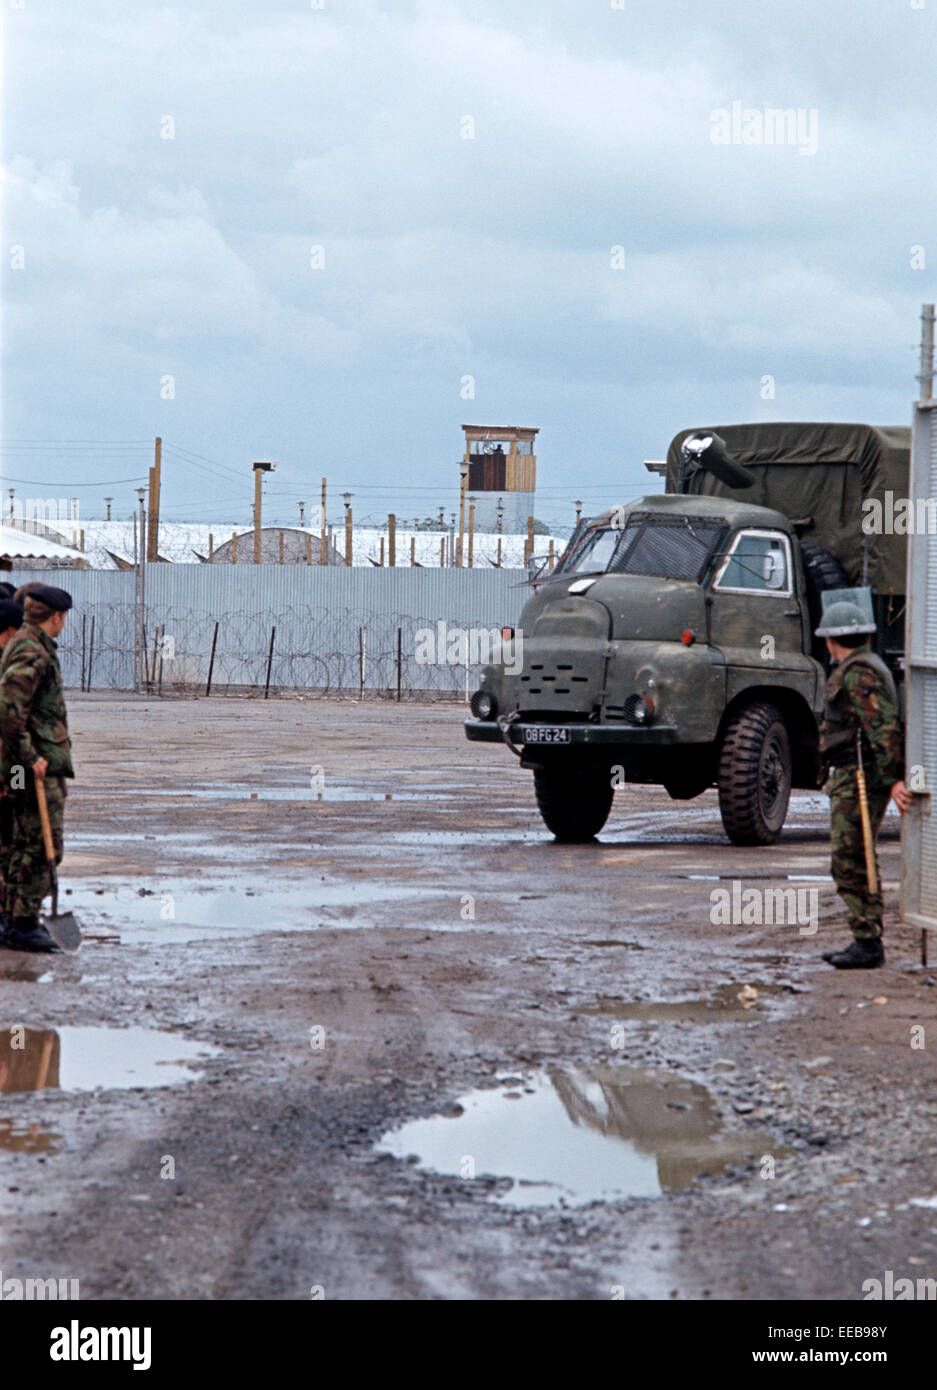 LONG KESH INTERNMENT CAMP, LISBURN, NORTHERN IRELAND - JUNE1972. Was set up in 1971 during The Troubles on an old Royal Air Force Base, when Internment was introduced....Mainly Catholics and a few Protestants were rounded up initially but soon it housed Republicans and Loyalists. Long Kesh became known as H Blocks and the Maze. Stock Photo